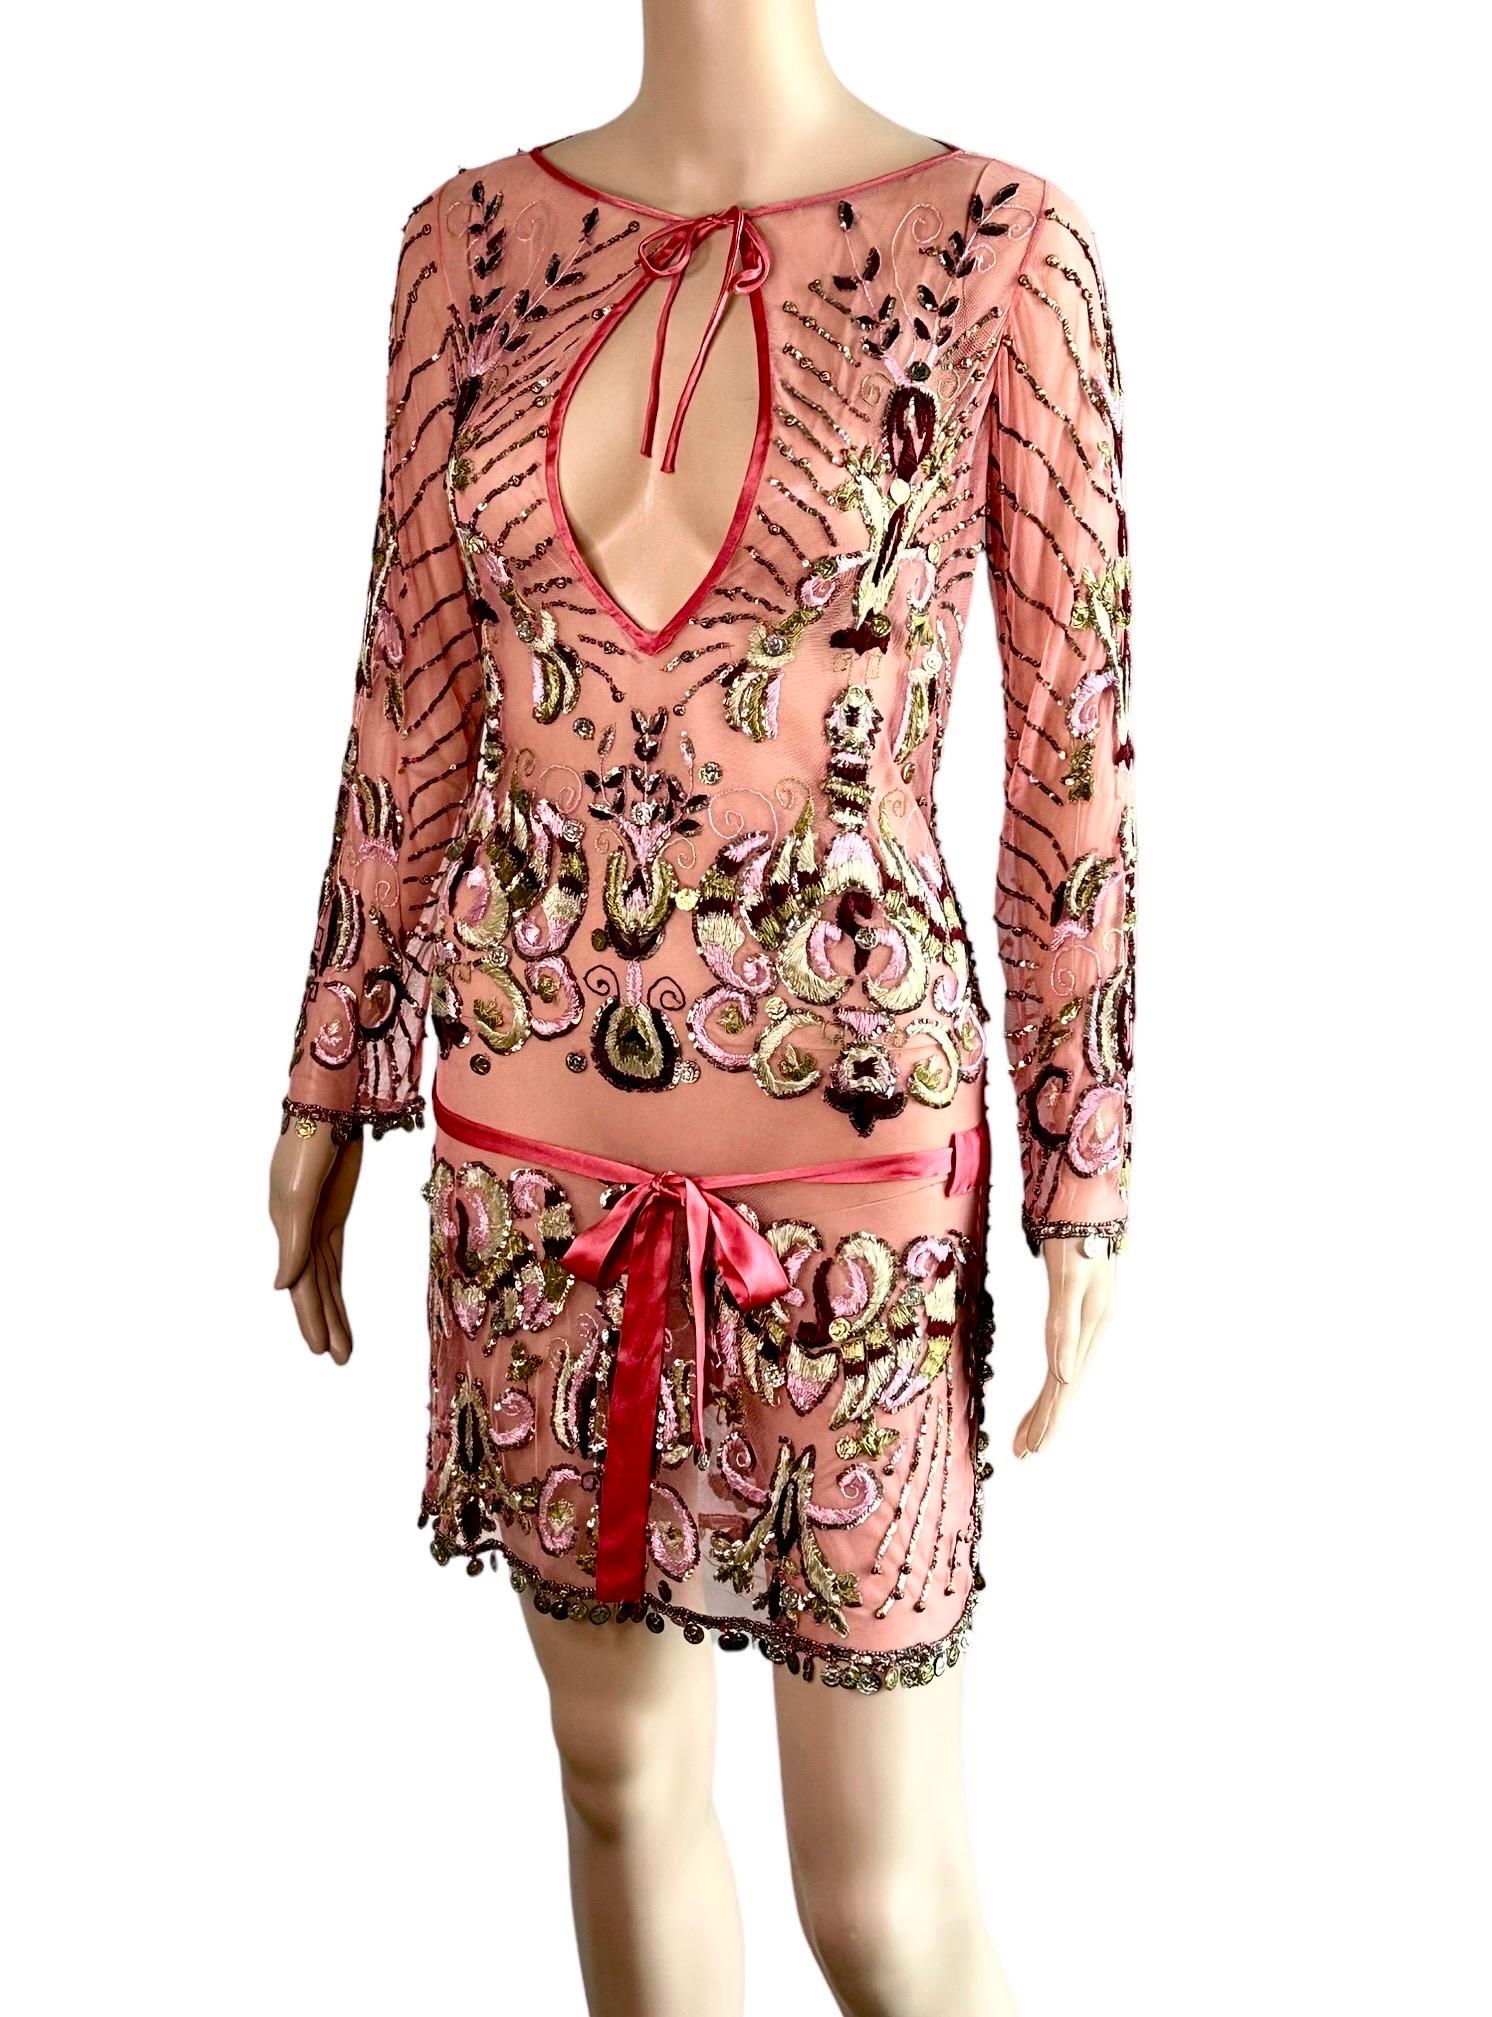 Roberto Cavalli S/S 2005 Embellished Sheer Mesh Embroidered Mini Dress Size XS

Please note this dress comes as a 2 piece set - the sheer mesh upper layer can be worn with or without the slip dress underneath based on preference ( see